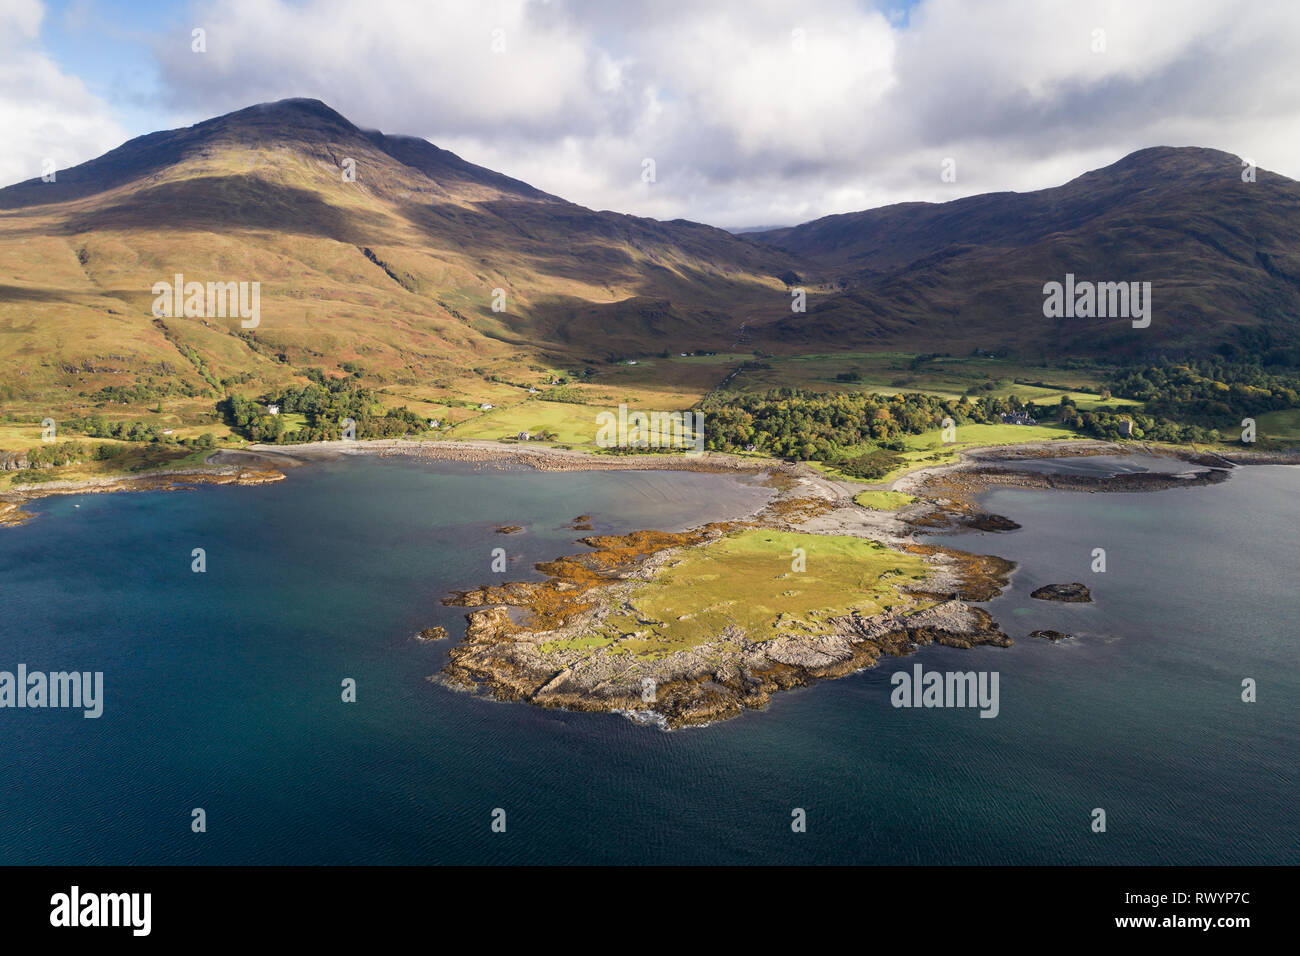 Aerial image showing the shoreline and mountains of Loch Buie, location of the cult 1940's film 'I Know Where I'm Going'. Stock Photo